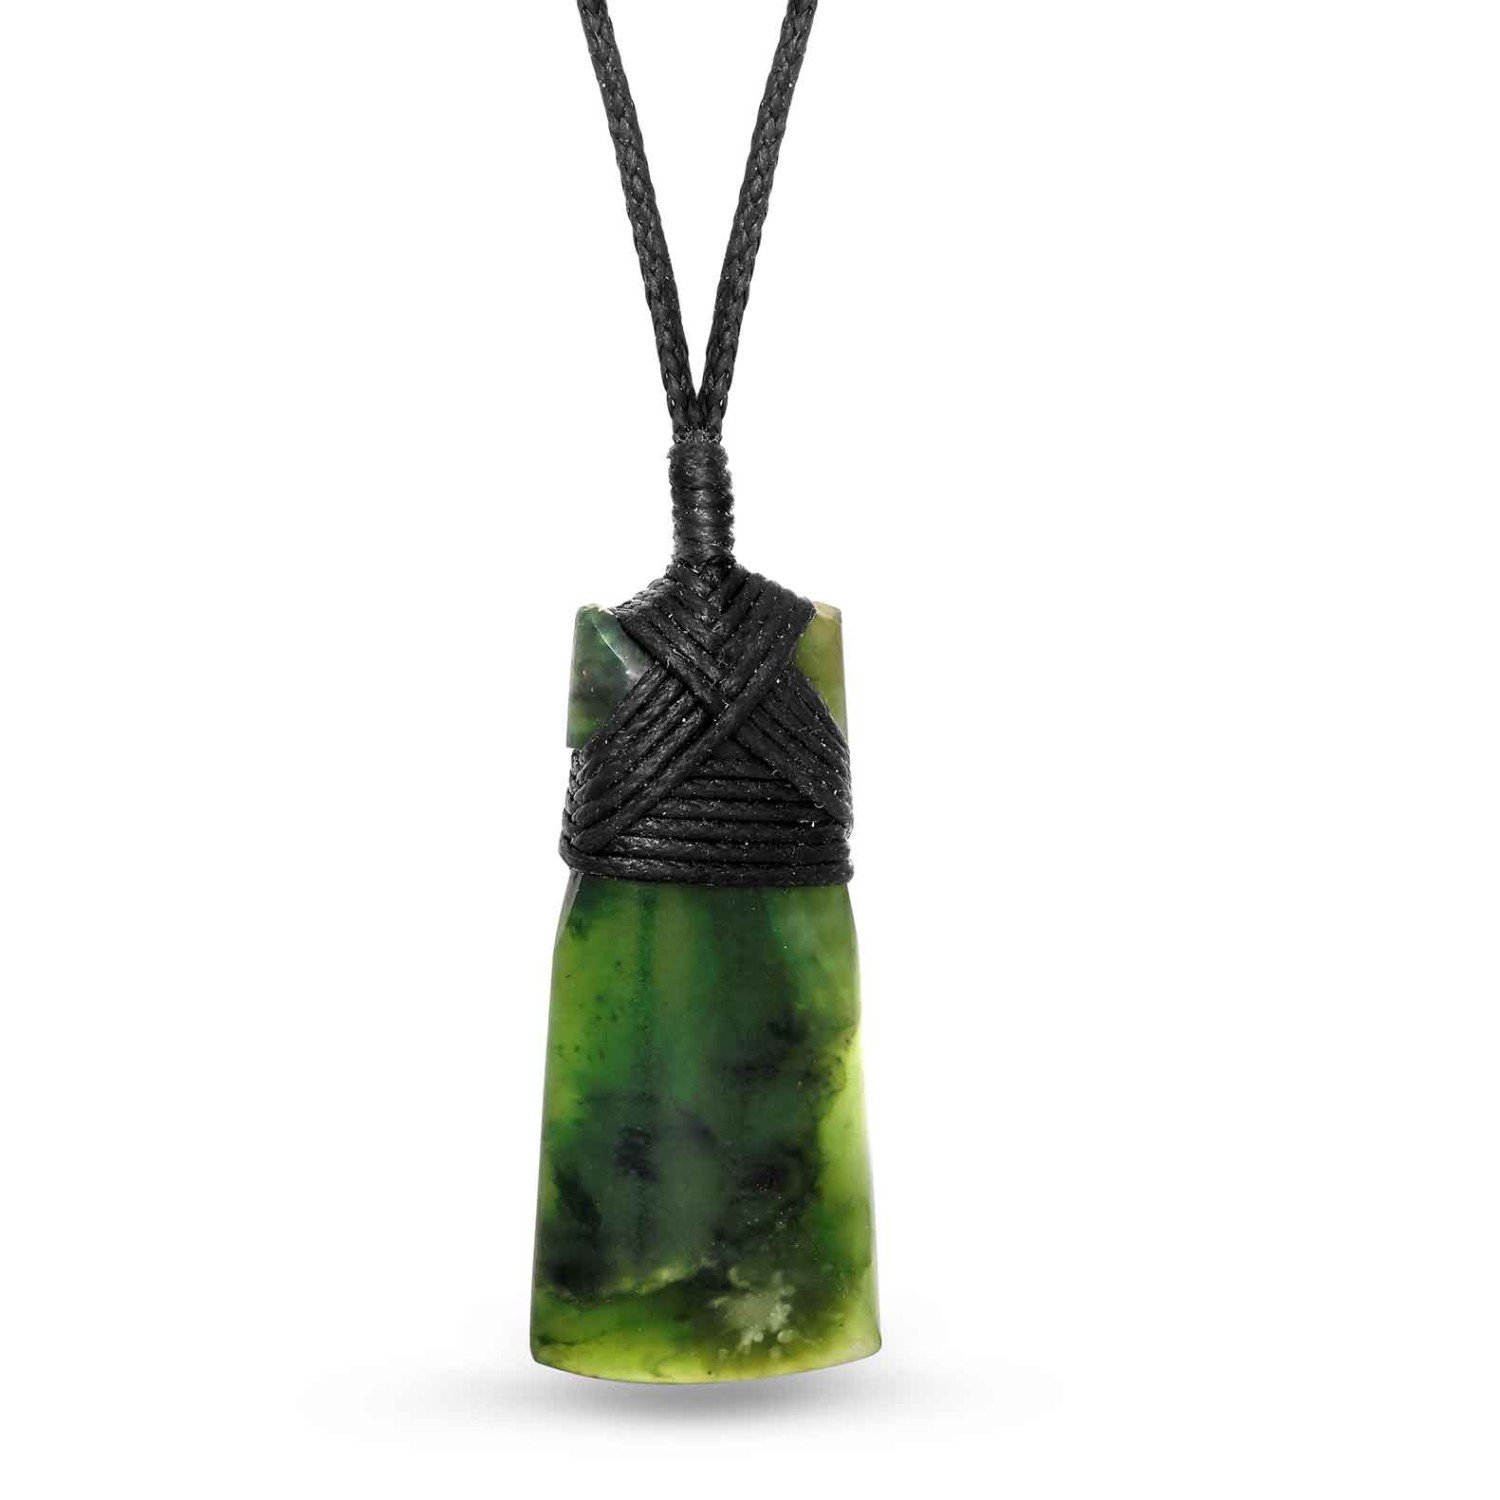 Pounamu Pendant On Cord. NZ Pounamu or Greenstone Pendant on a cord, Carved in NZ Greenstone 40mm x 29mm Supplied on a black cord for wearing as a pendant Gift Boxed 5 Year Written Guarantee Oxipay is simply the easier way to pay - use Oxip @christies.onl